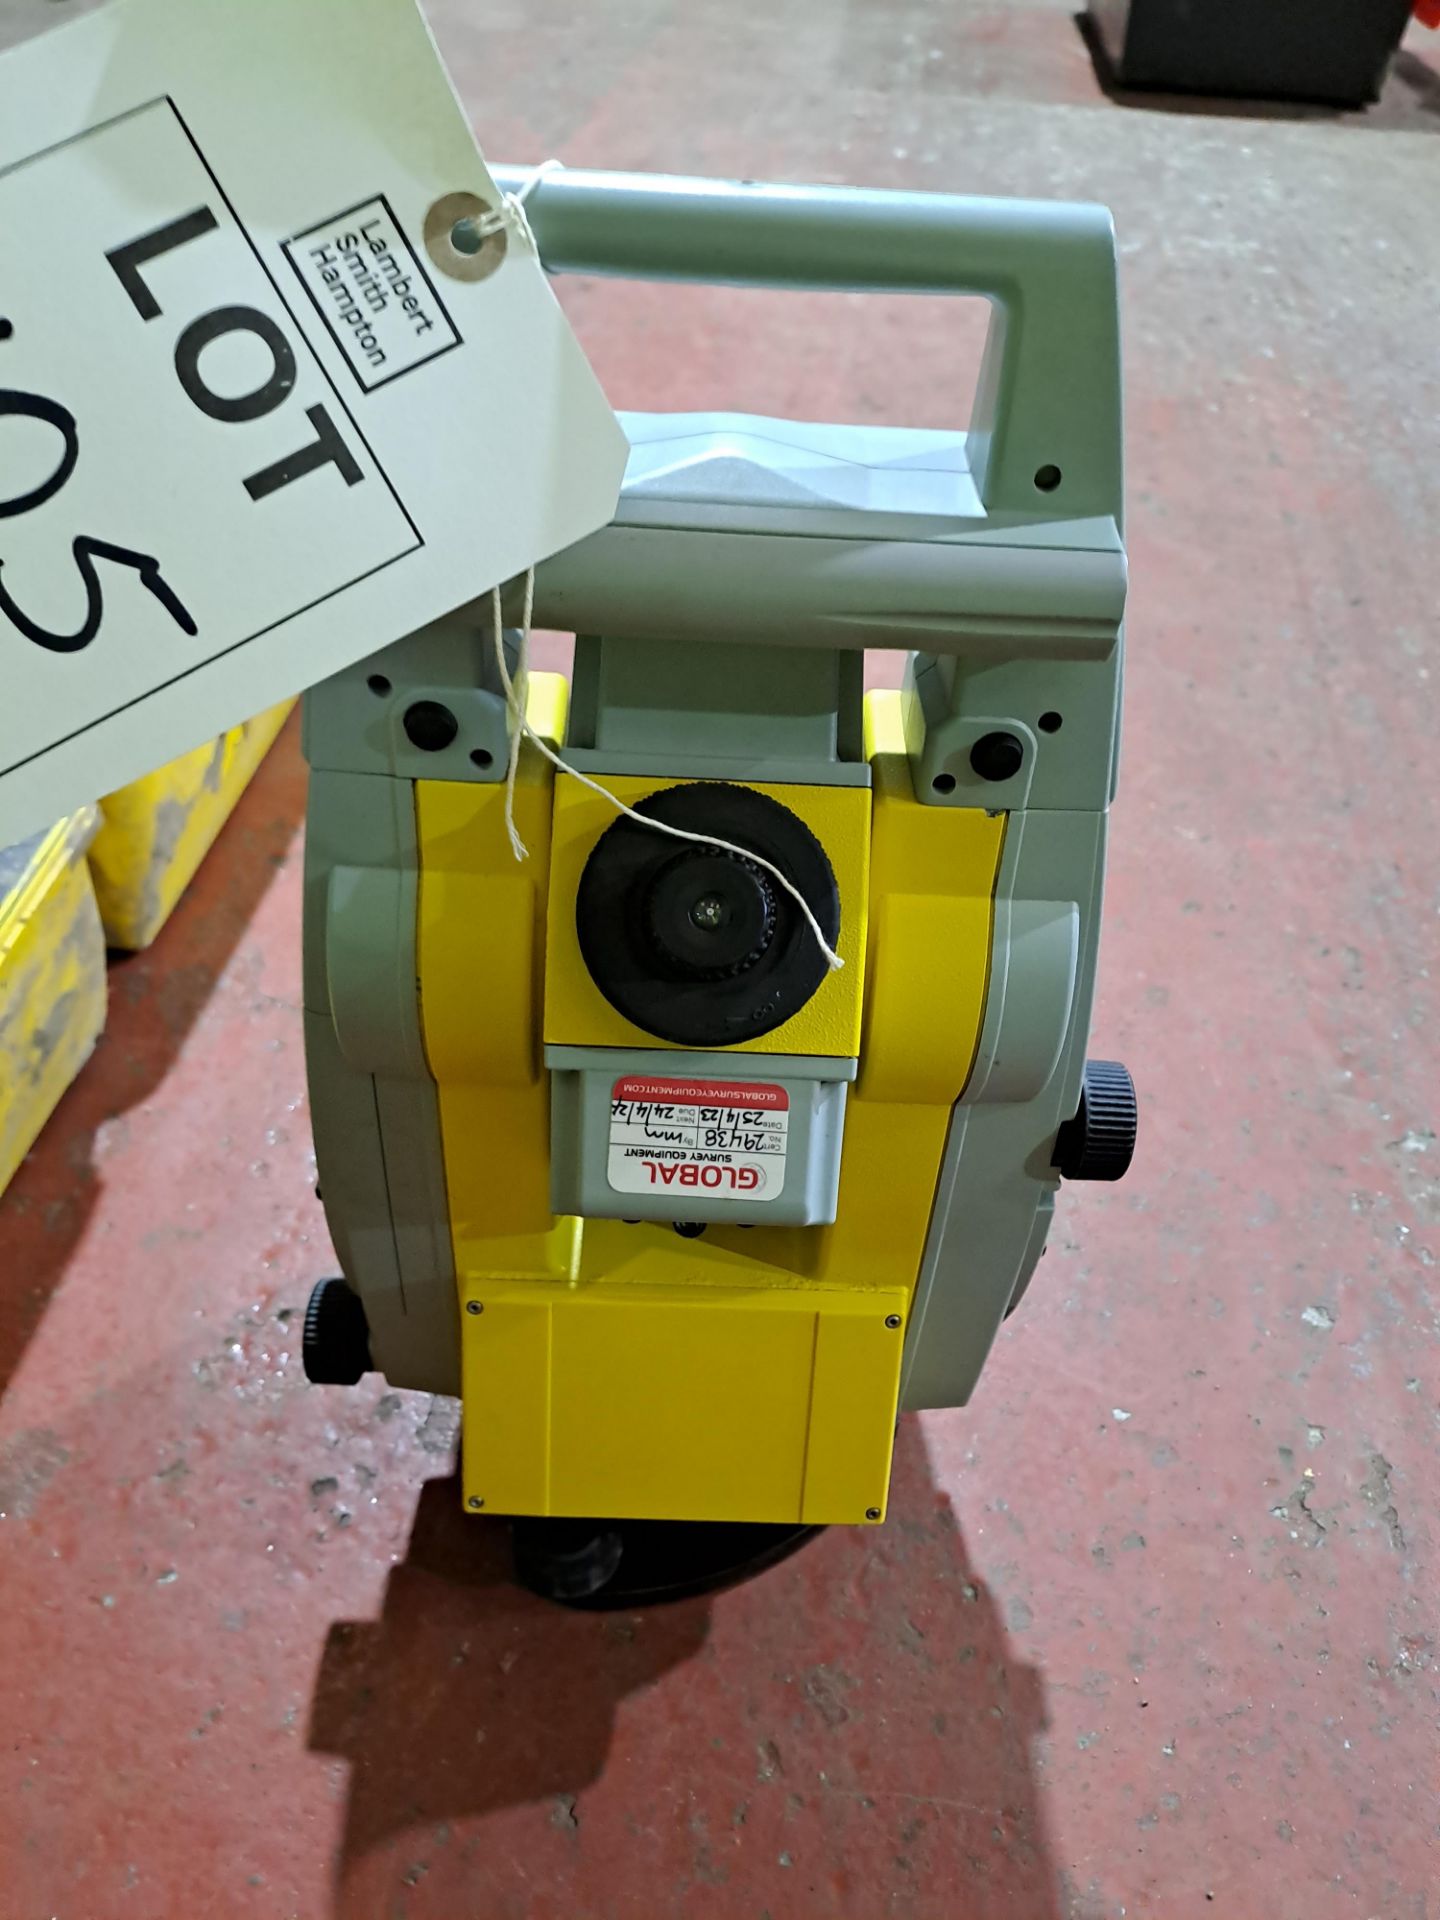 GeoMax Ag ZTR82 Zoom 90 Series robotic total station, serial no. 4008376, Art no. 834473, year 2019, - Image 3 of 3